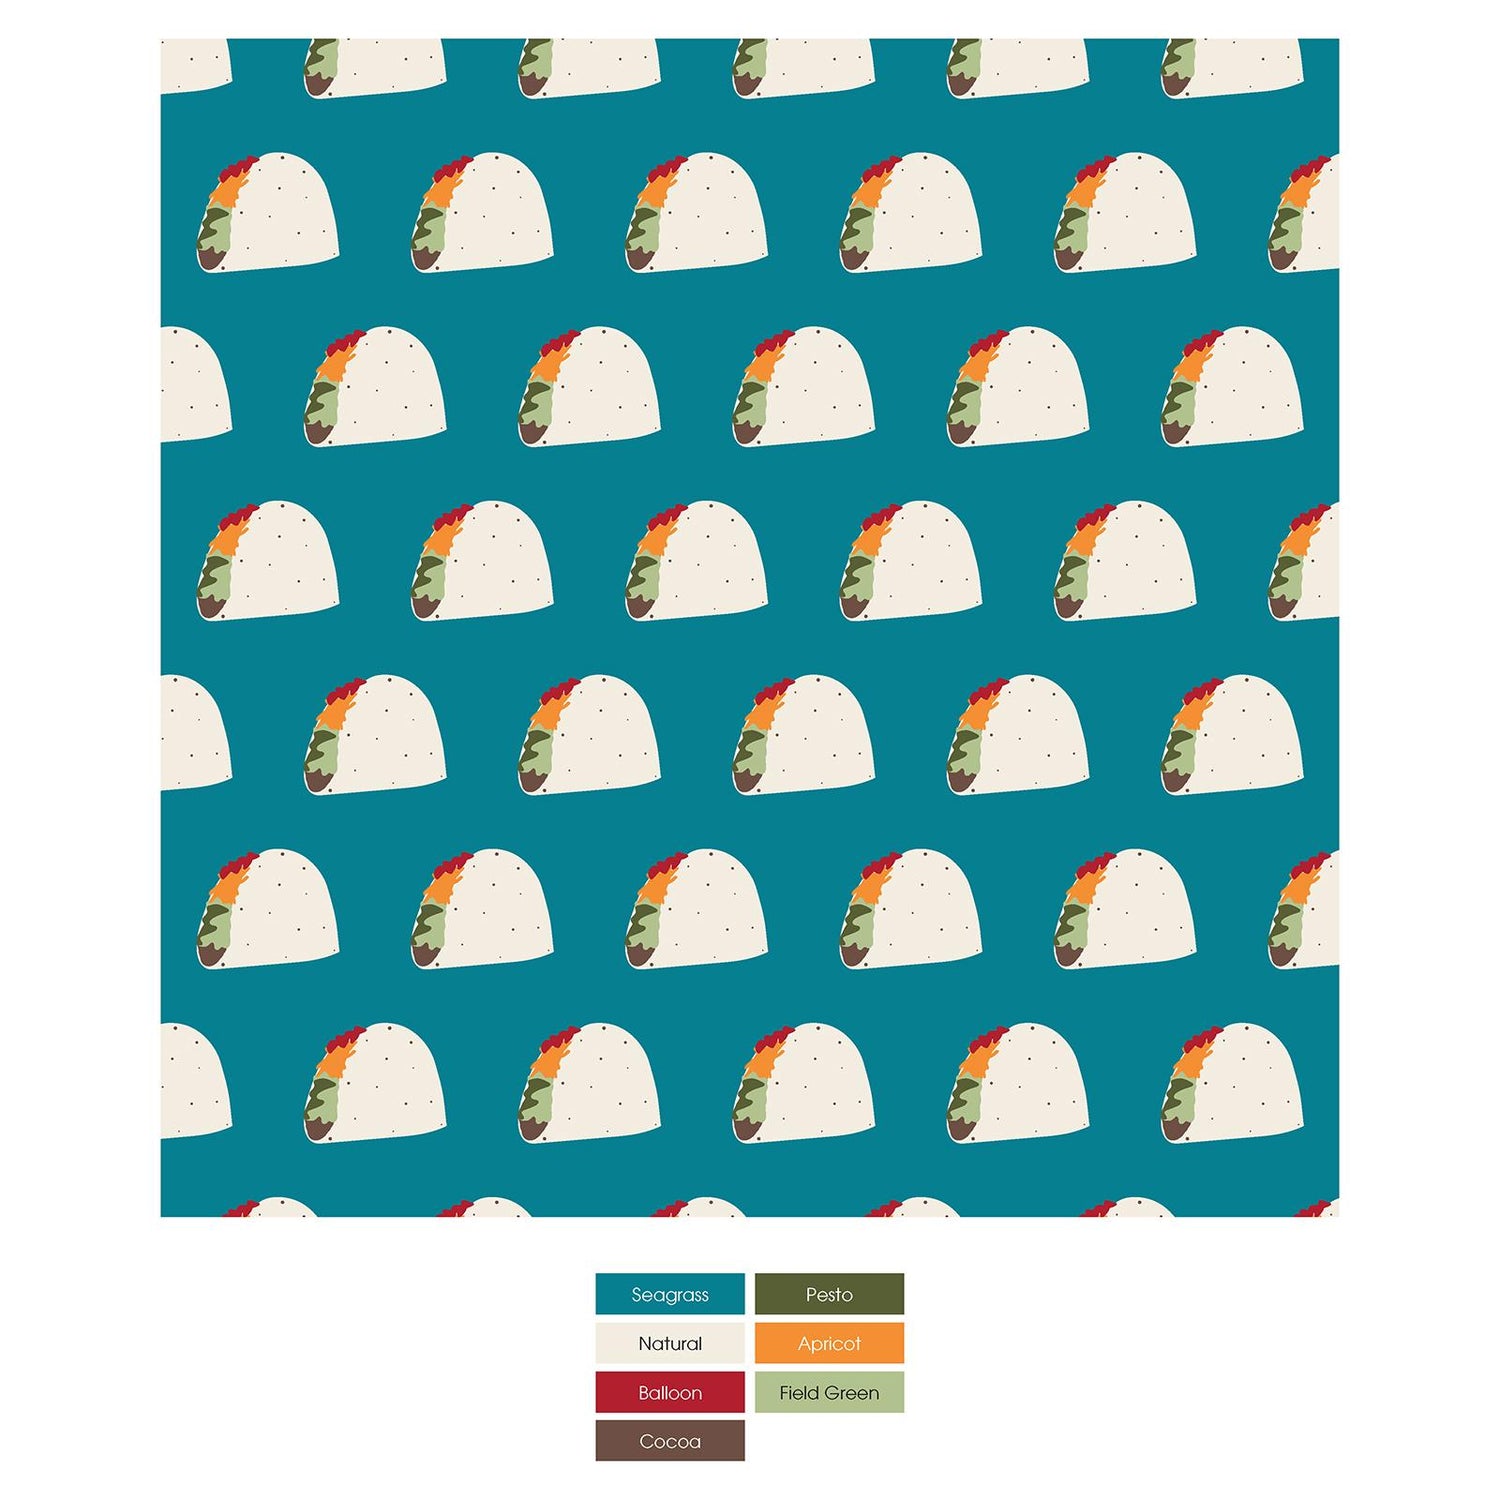 Print Burp Cloth and Bib Set in Seagrass Tacos